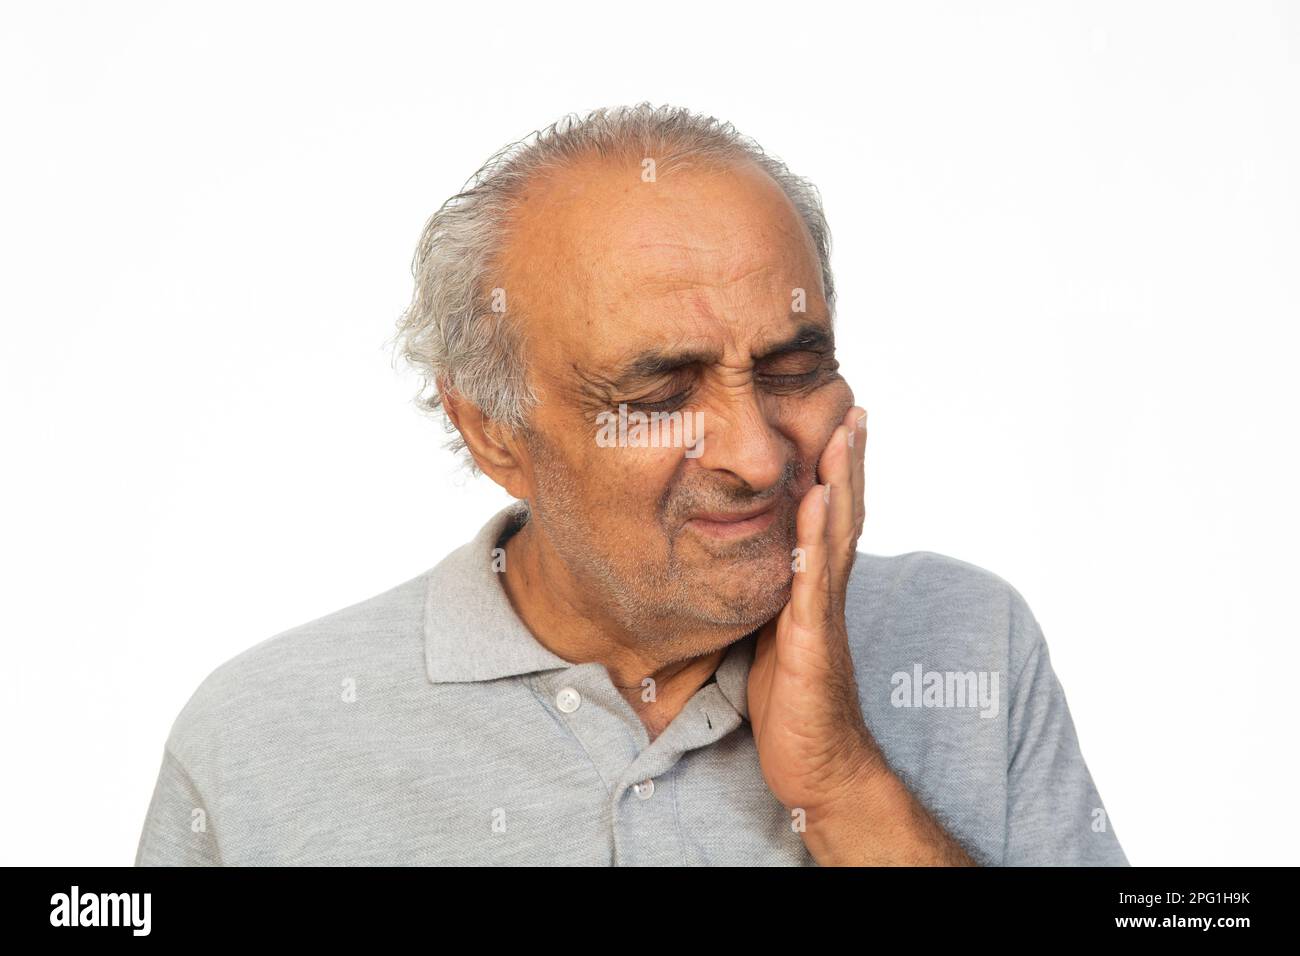 Old man with toothache Stock Photo